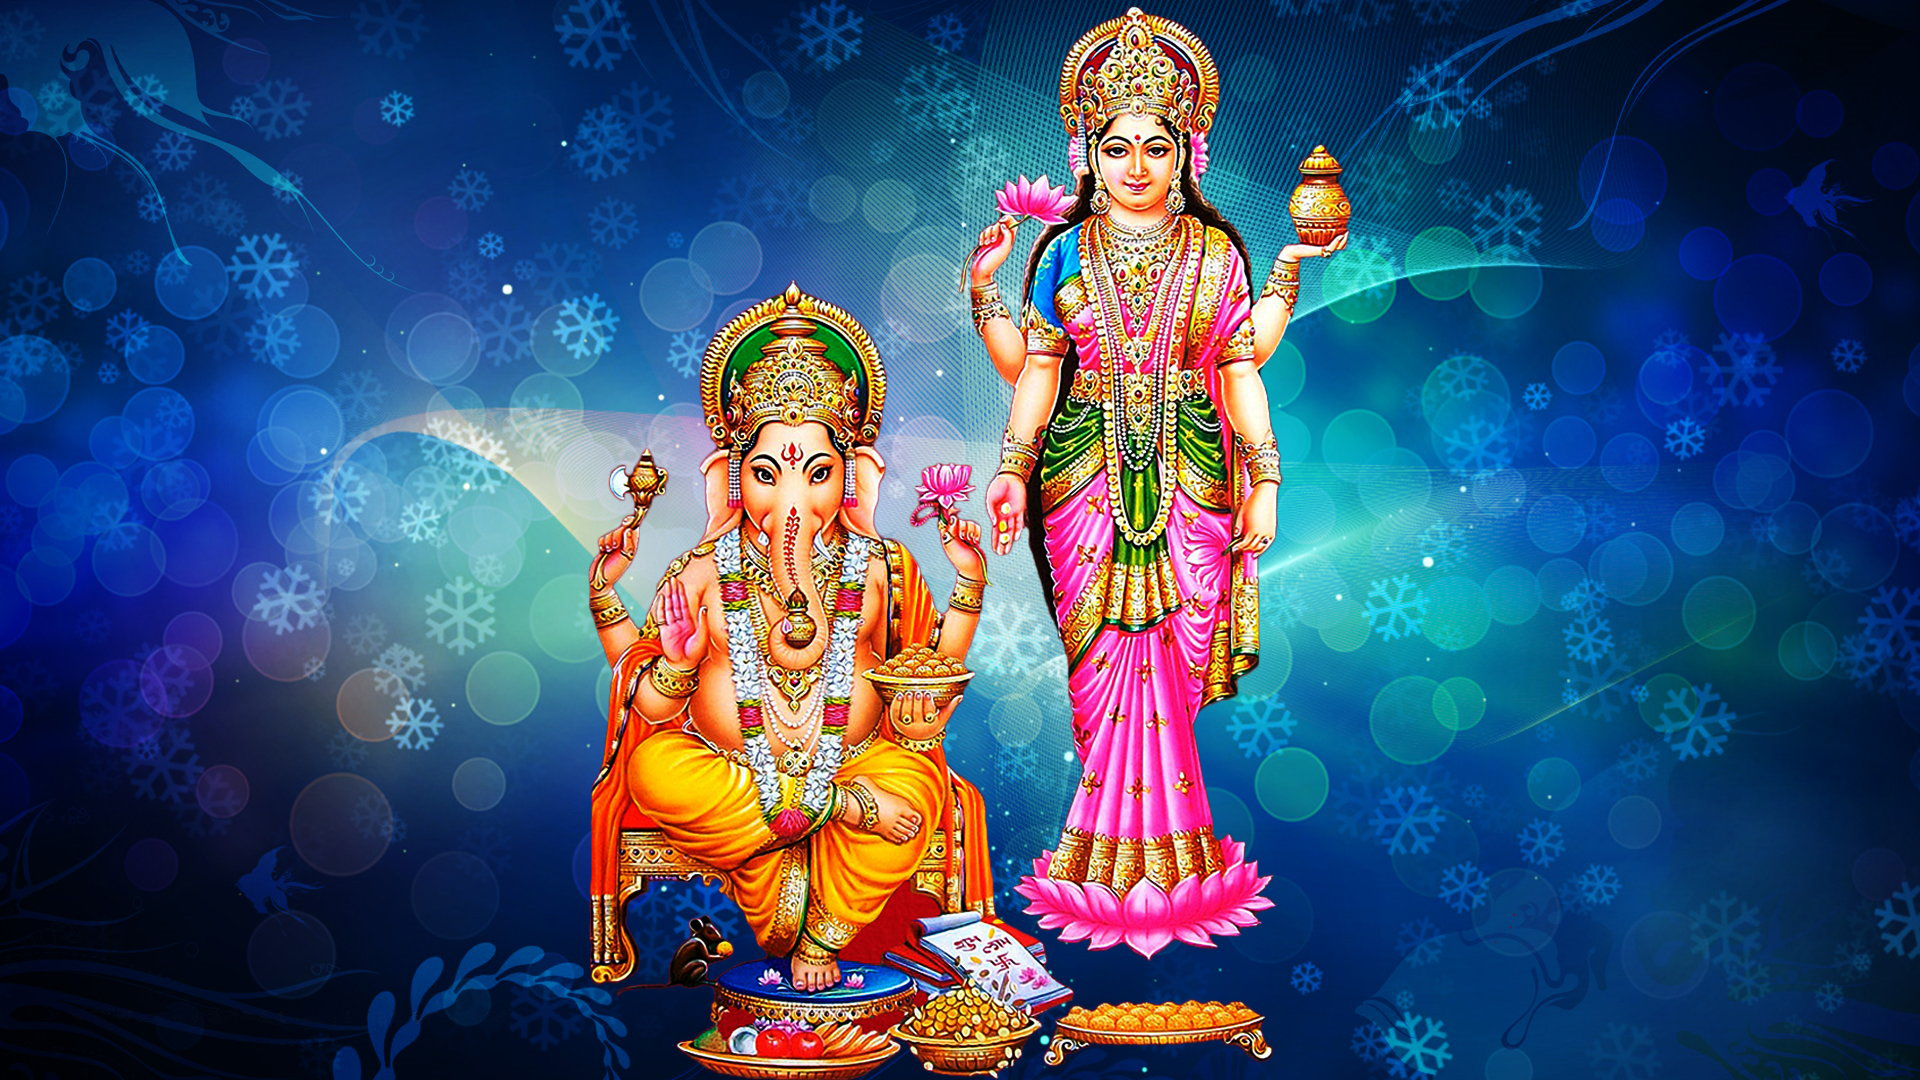 Goddess Laxmi And Lord Ganesh Blue Decorative Background With